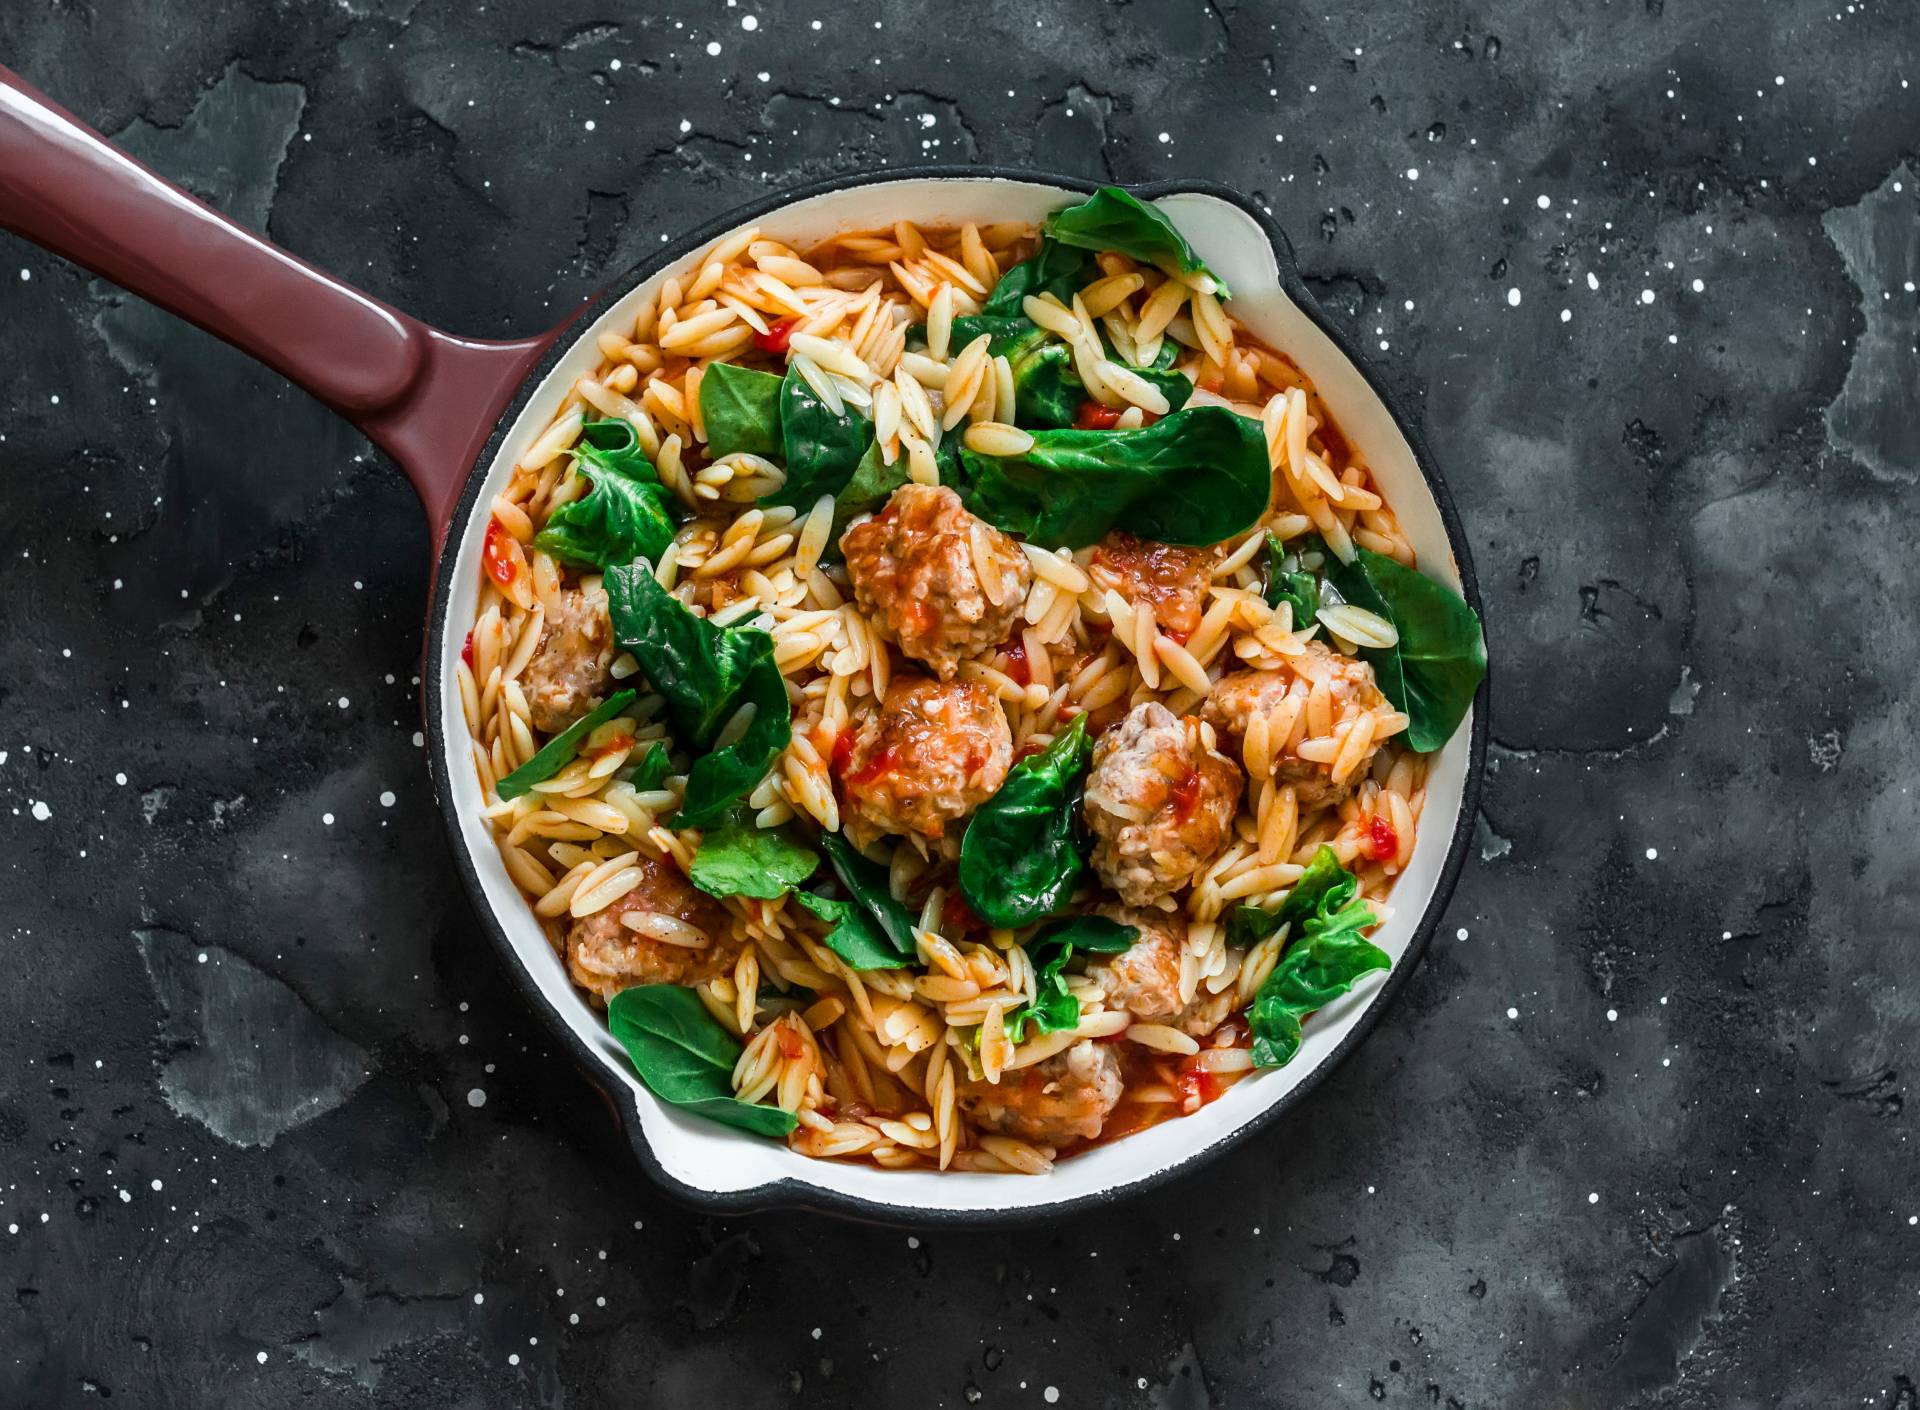 Orzo with Turkey Meatballs, Olives, Spinach and Feta